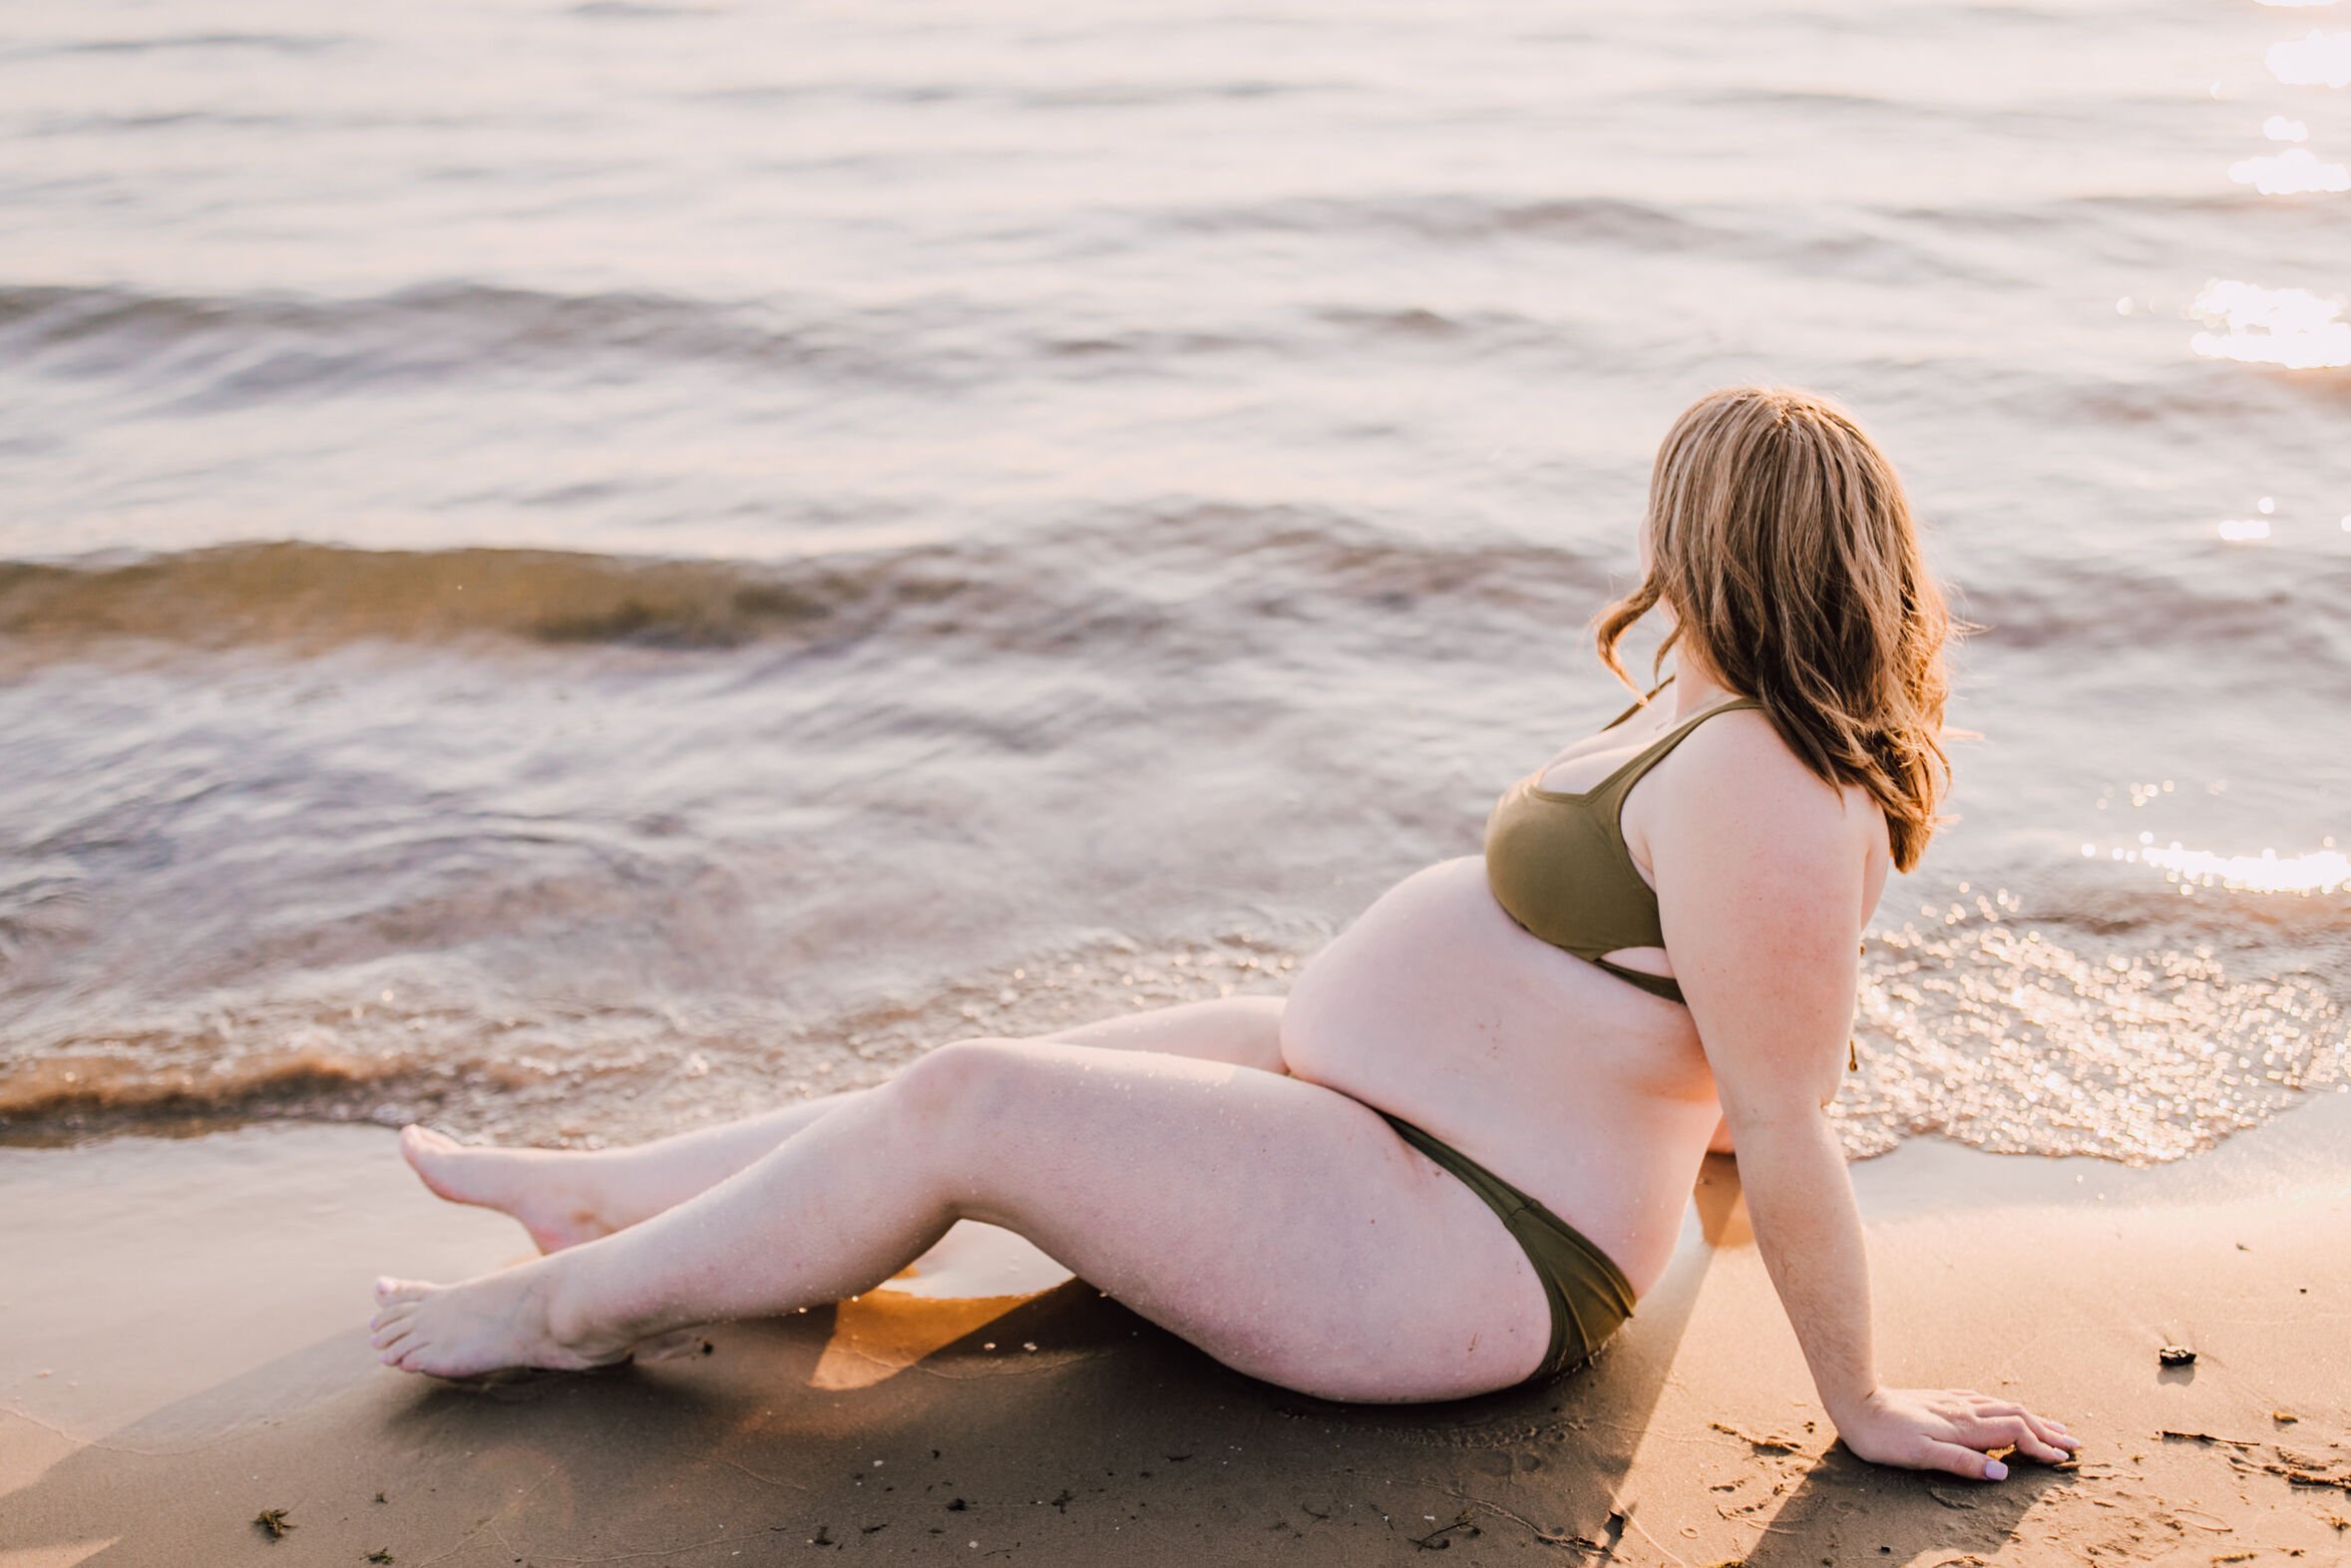  A woman lays on the beach and looks out onto the water, beach maternity photos&nbsp; 